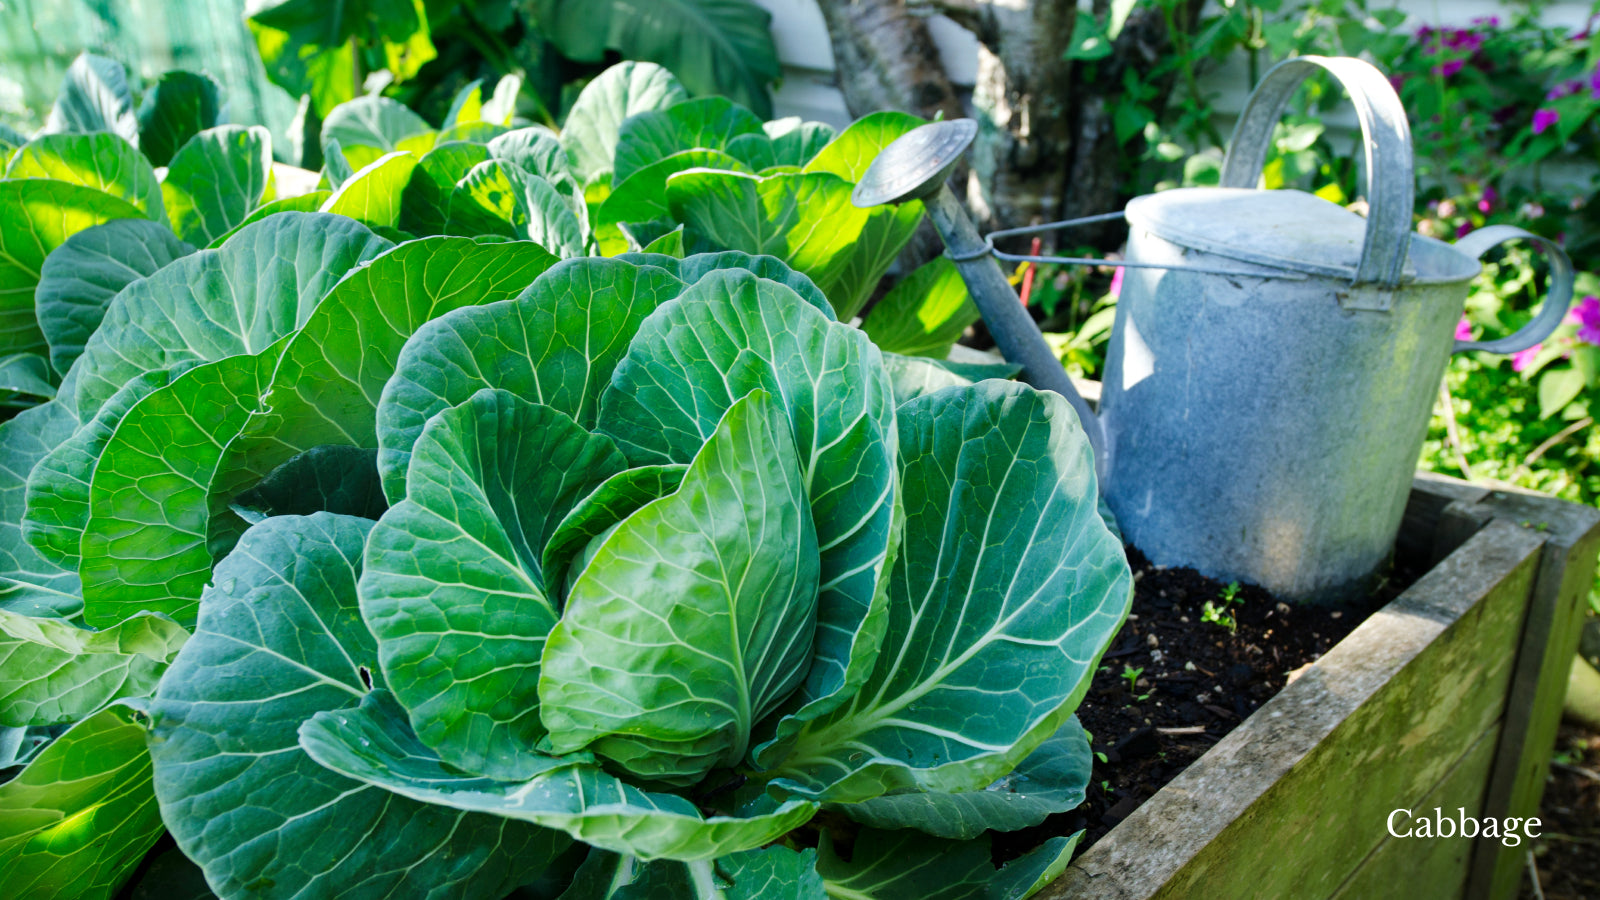 Green cabbage in a planter box next to a watering can